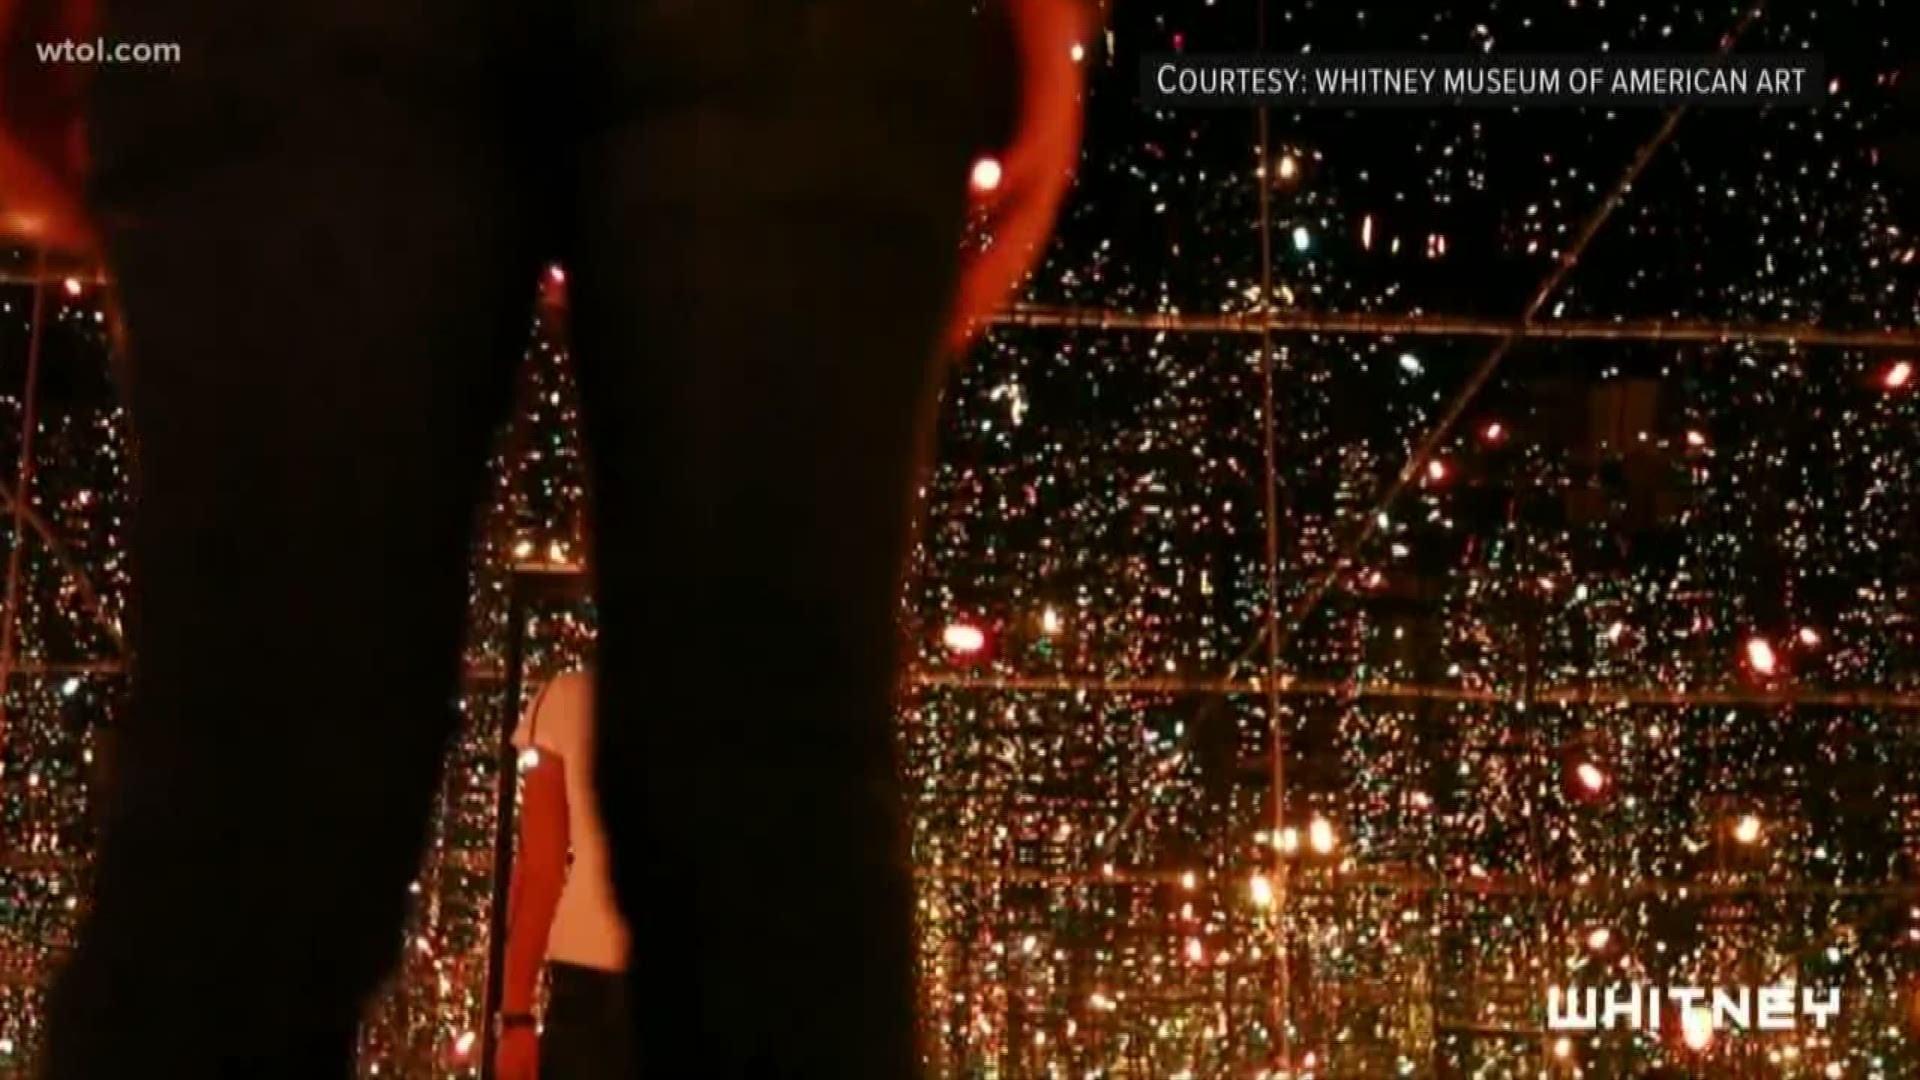 Twinkling lights highlight an artist's obsession and mesmerize viewers.